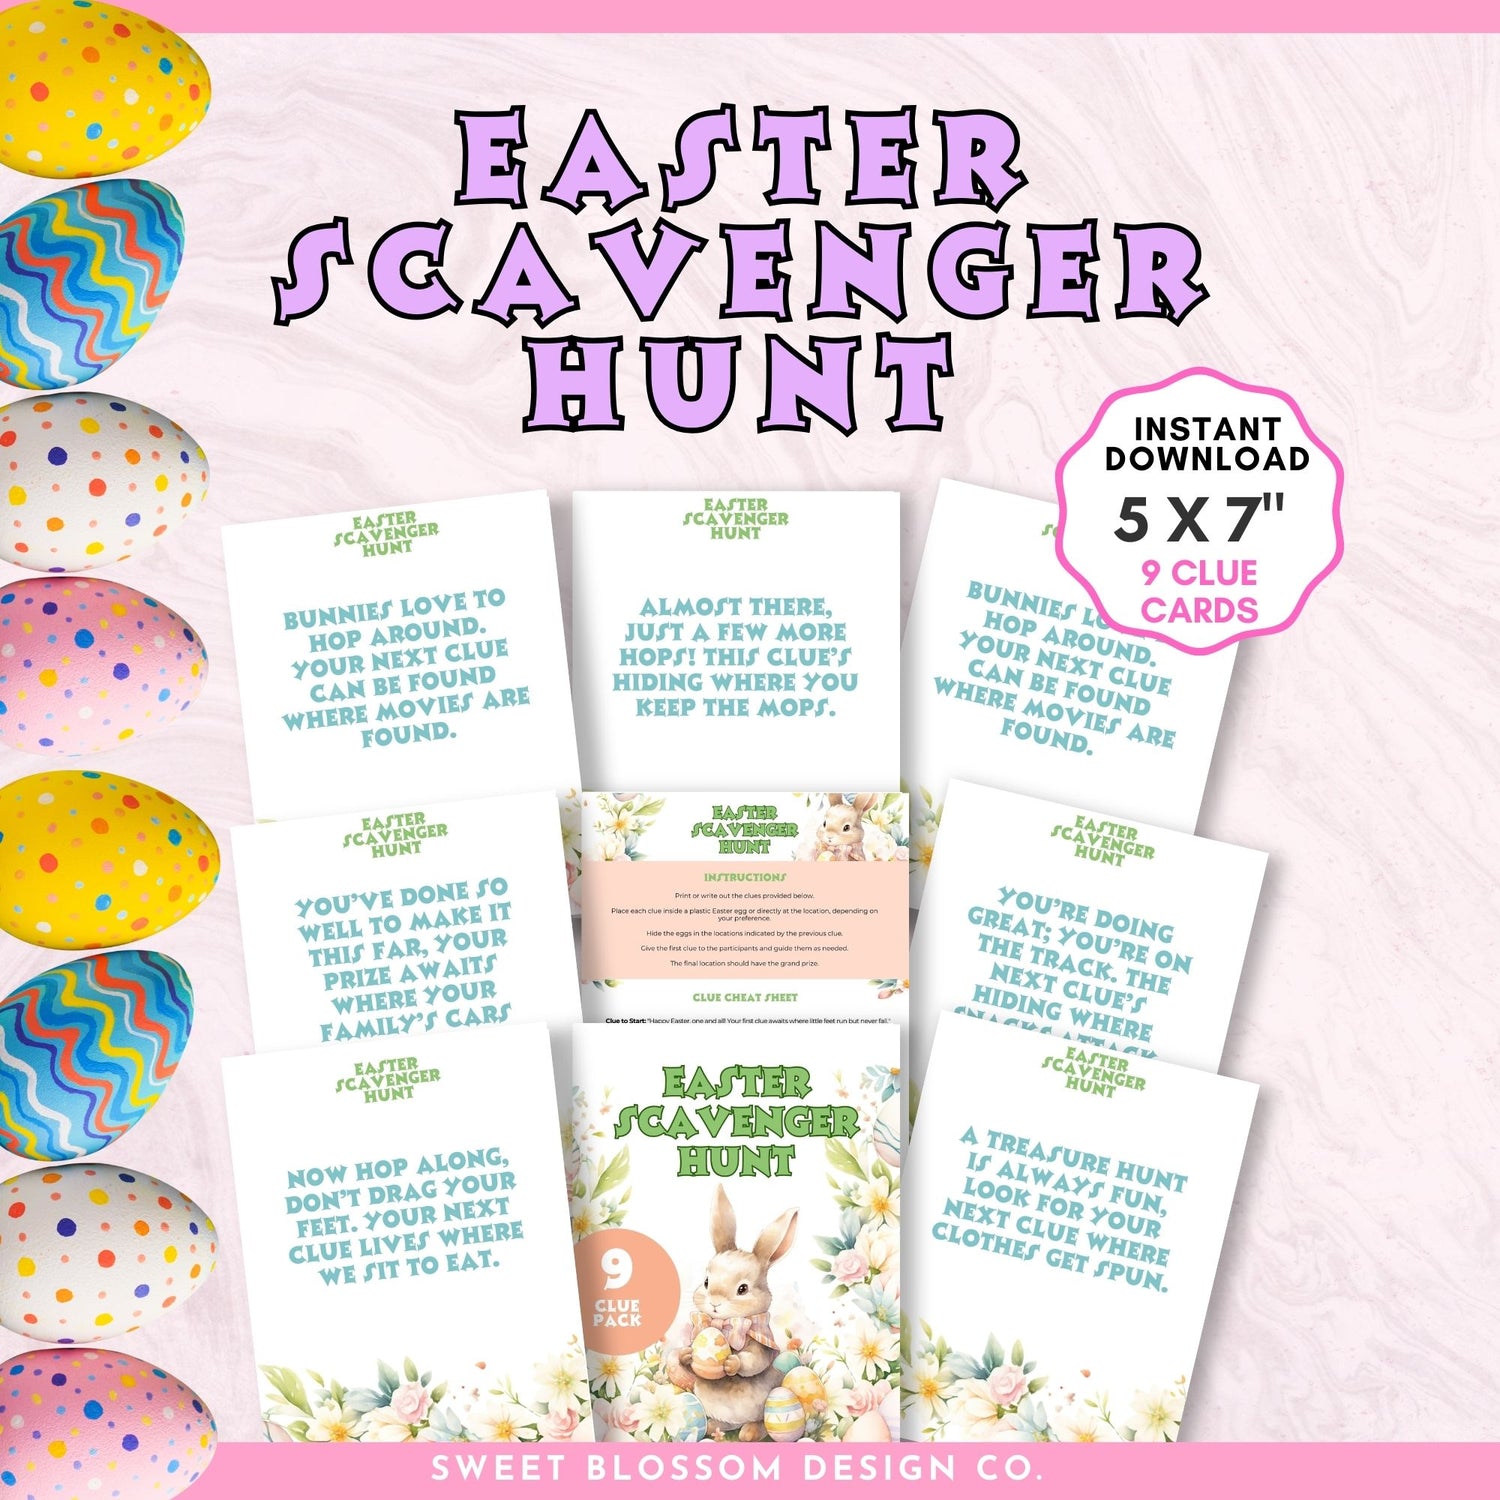 Get ready to hop into Easter fun with our delightful set of 9 printable Easter Scavenger Hunt Clue cards! Whether you&